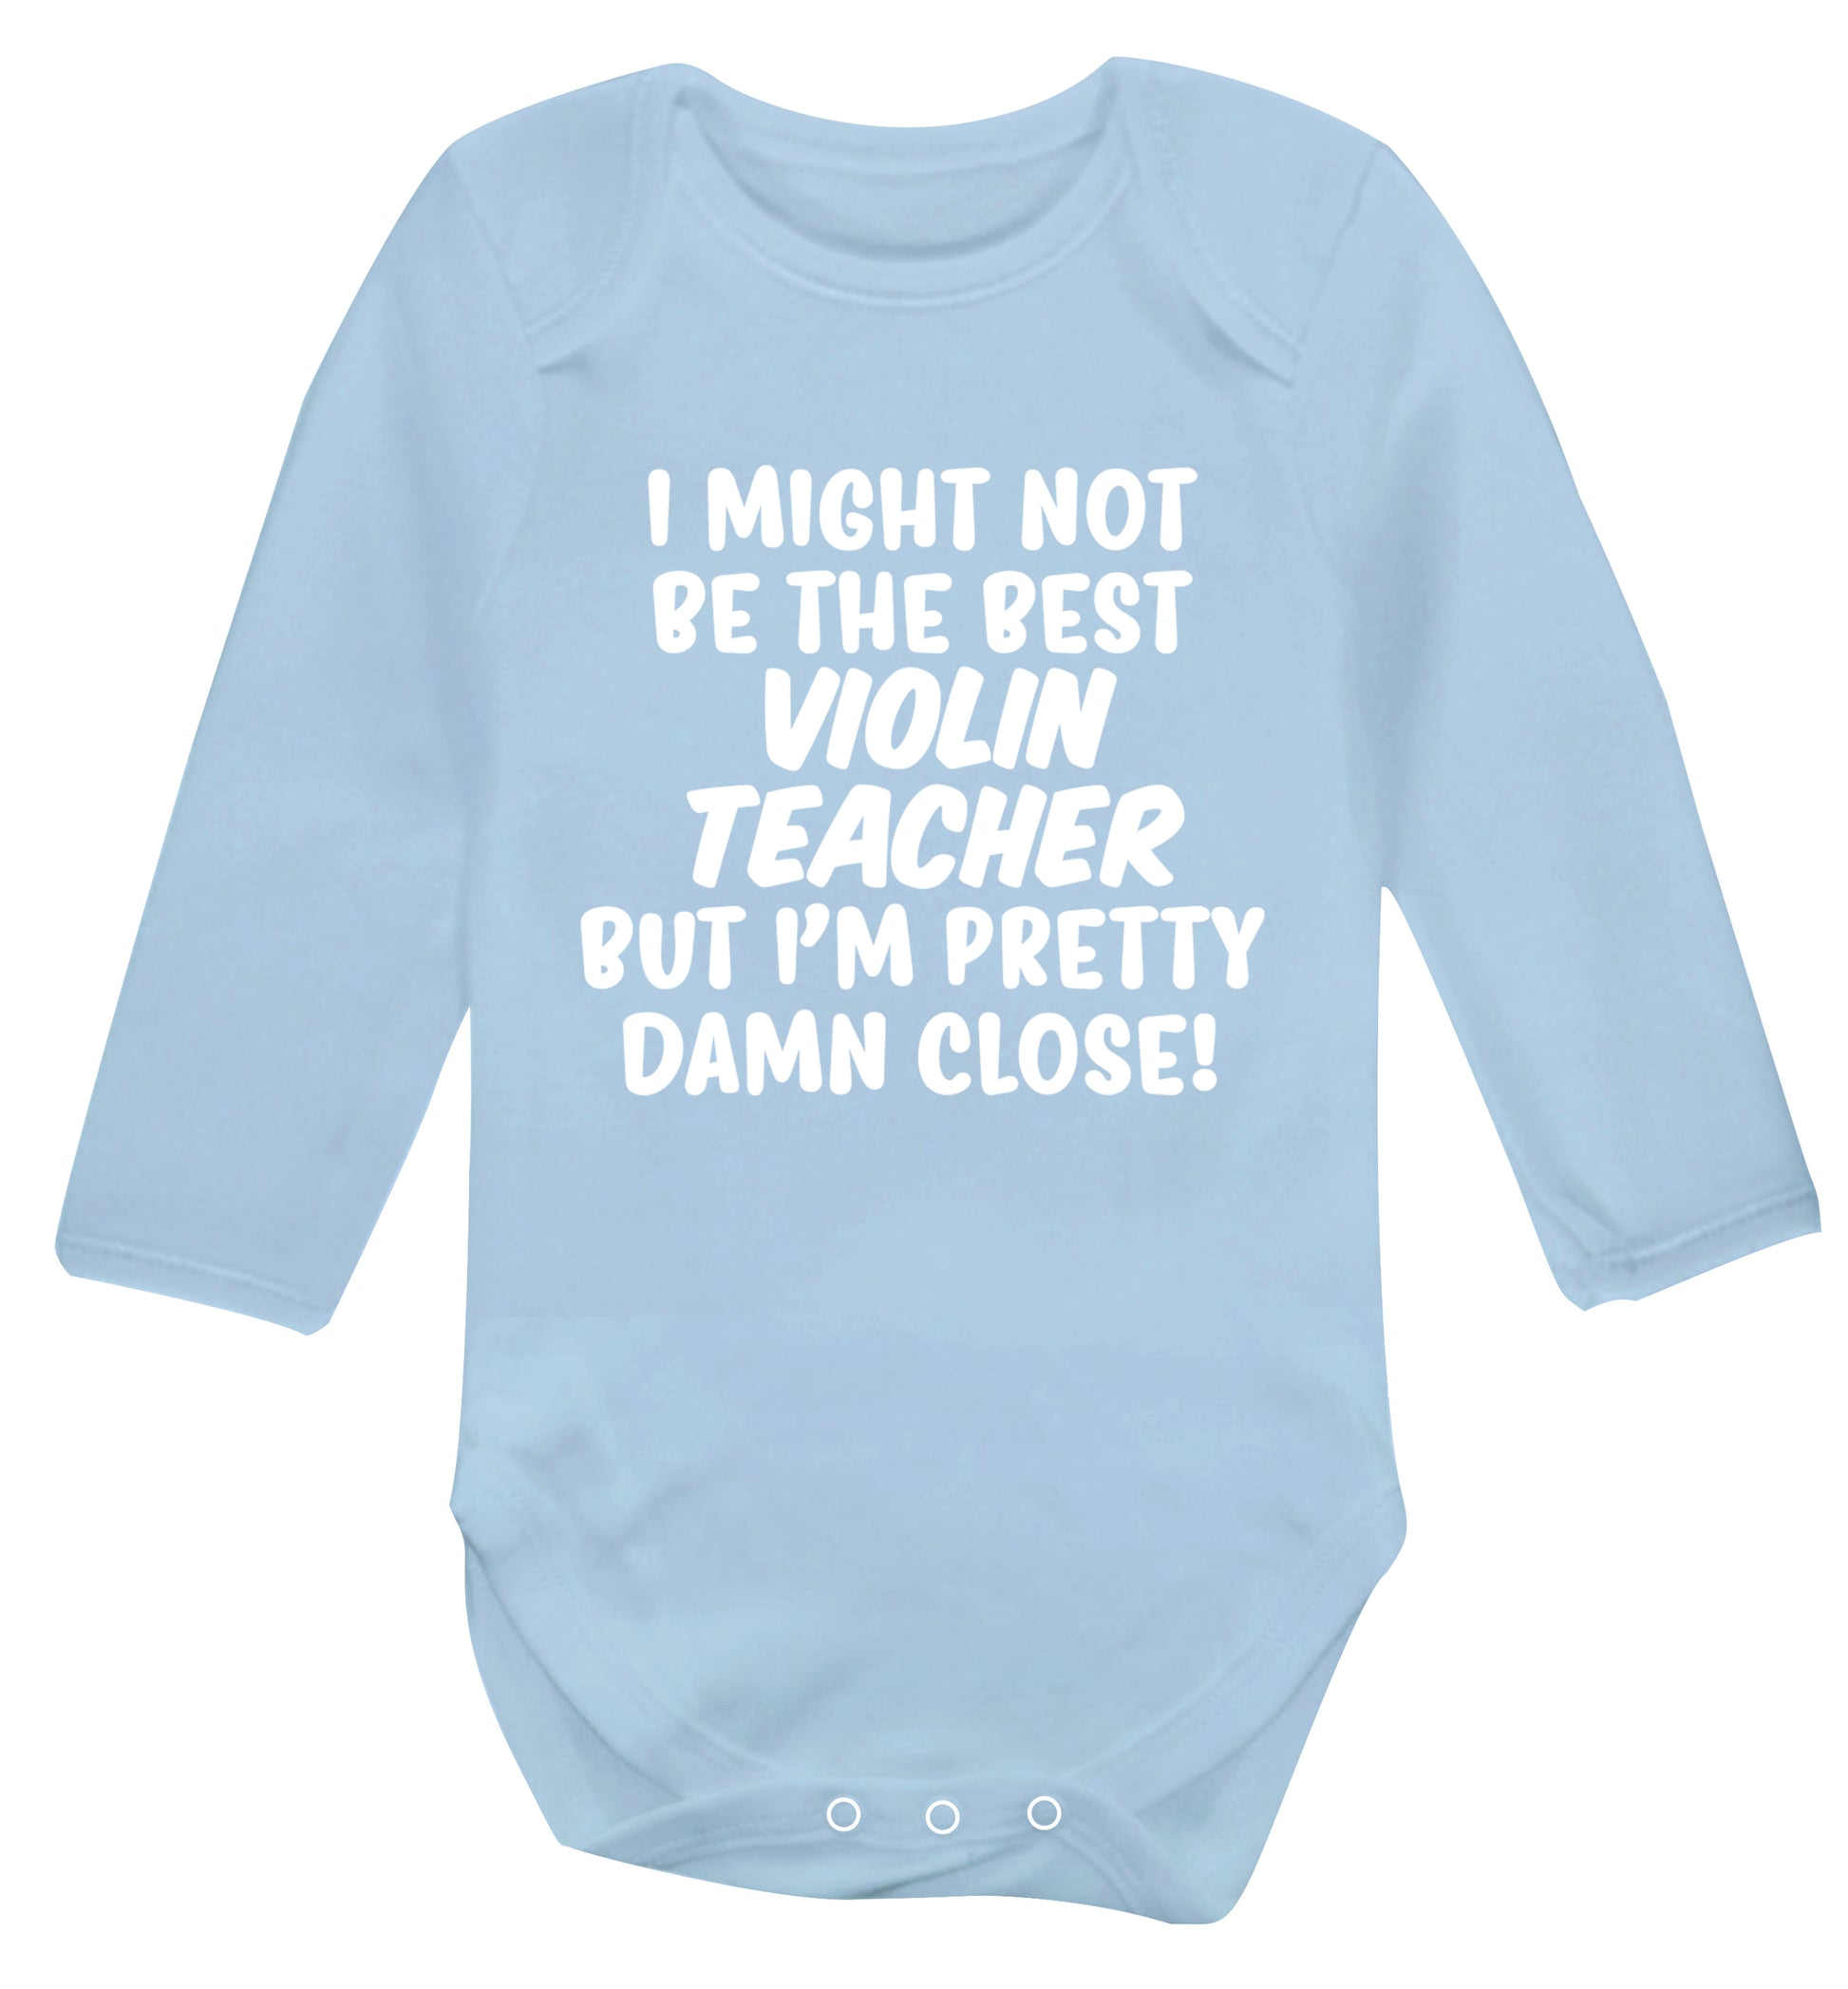 I might not be the best violin teacher but I'm pretty close Baby Vest long sleeved pale blue 6-12 months